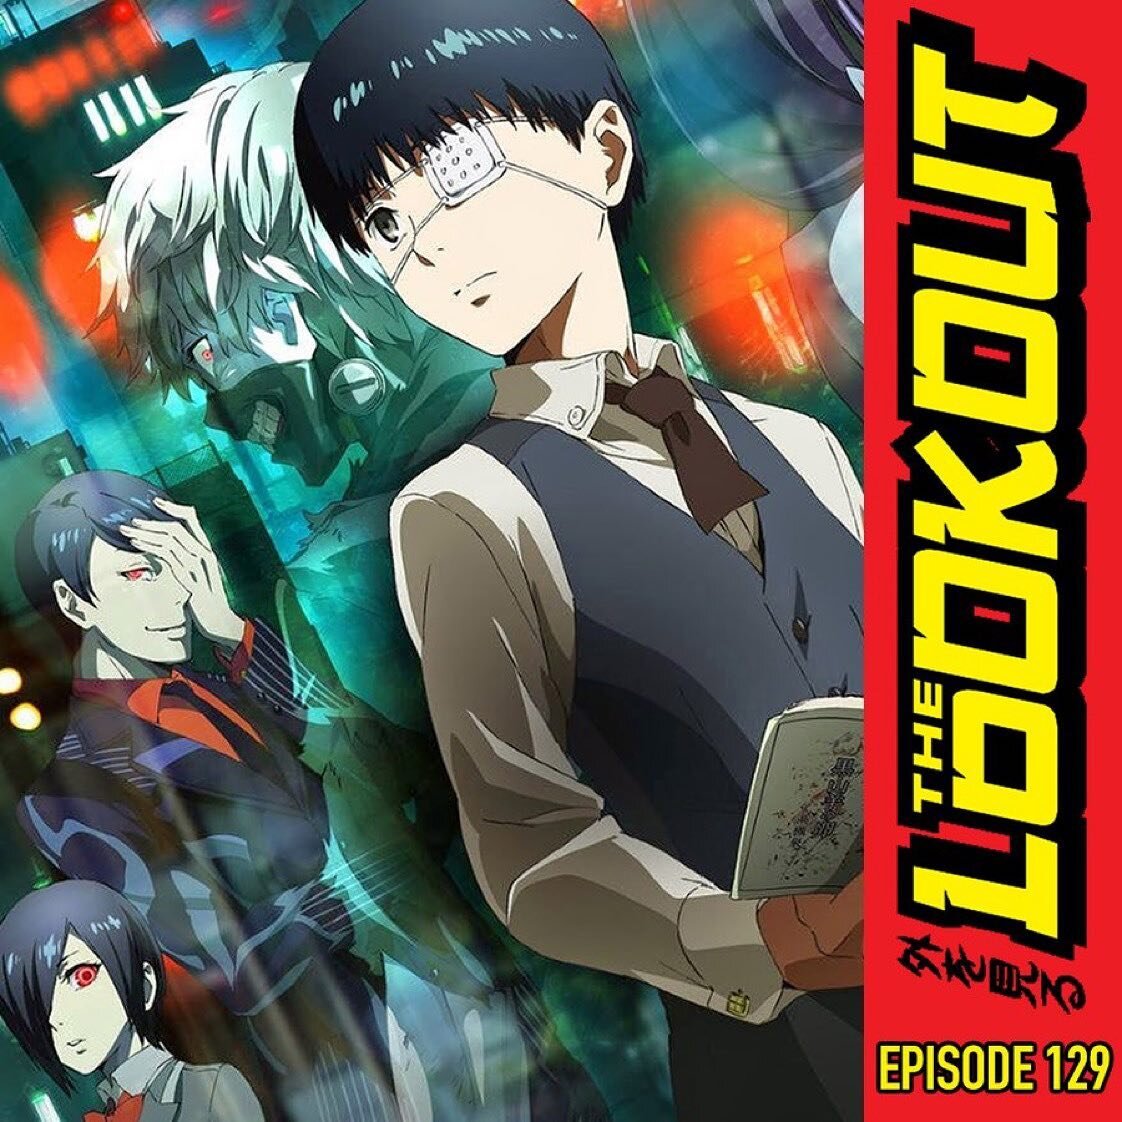 TOKYO GHOUL SEASON 1👻🩸

@MeelzTV is joined by @onlyatlj on this episode of The Lookout to take a deep dive into the horrors, thrills, and mystery of Tokyo Ghoul Season 1.

🎧 Tune in: Link in bio